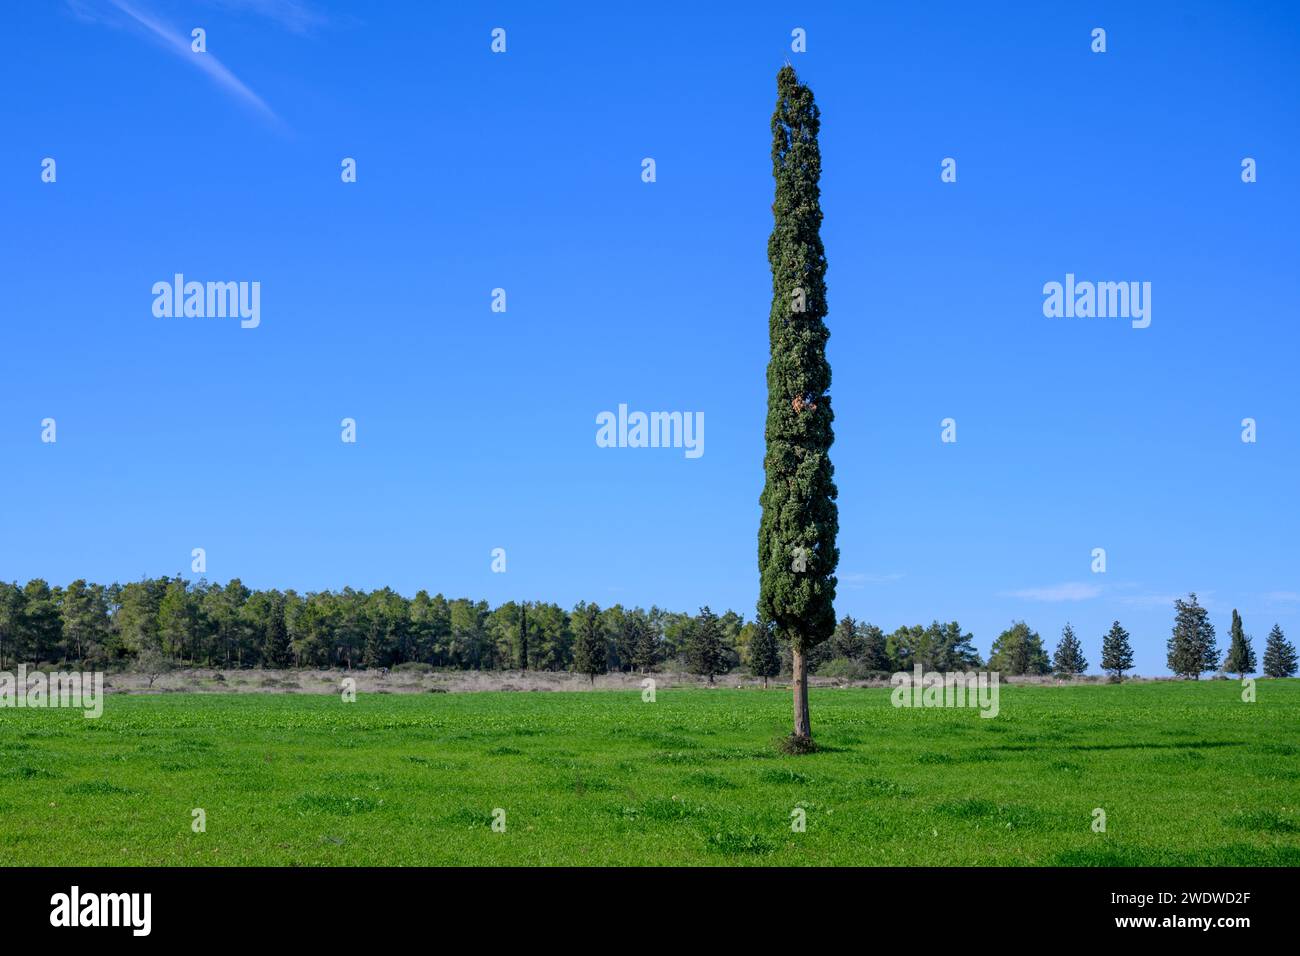 A lone cypress tree in a lush green field Cupressus is one of several genera of evergreen conifers within the family Cupressaceae photographed in Isra Stock Photo